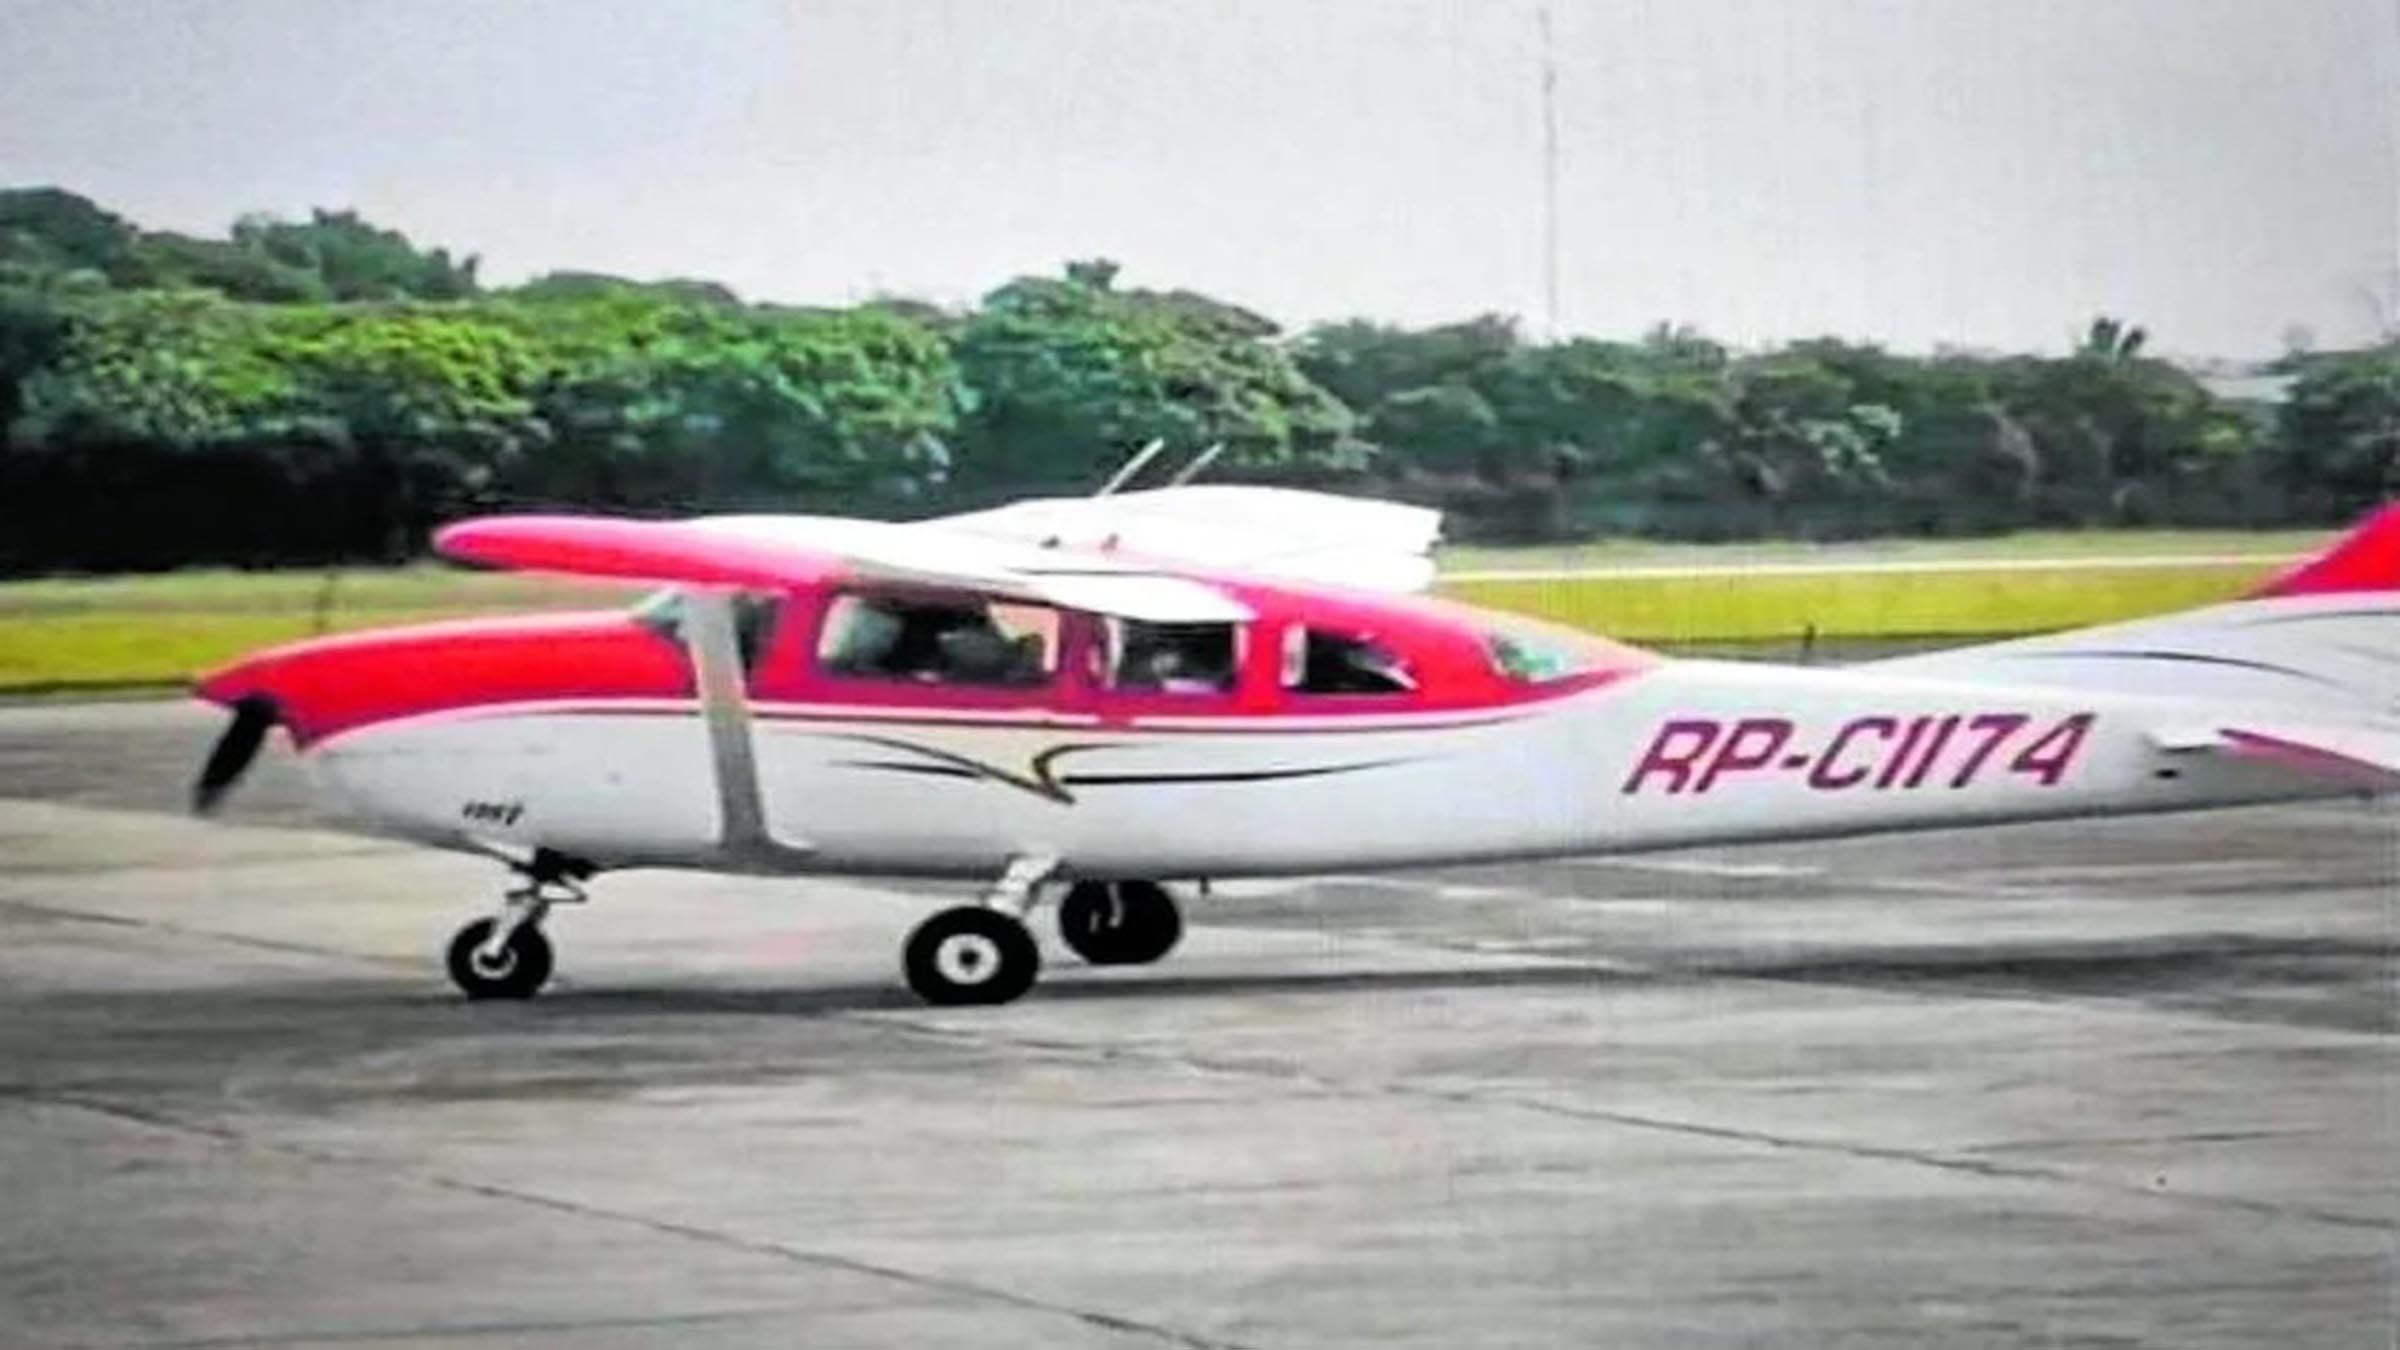 Search for missing Cessna plane continues